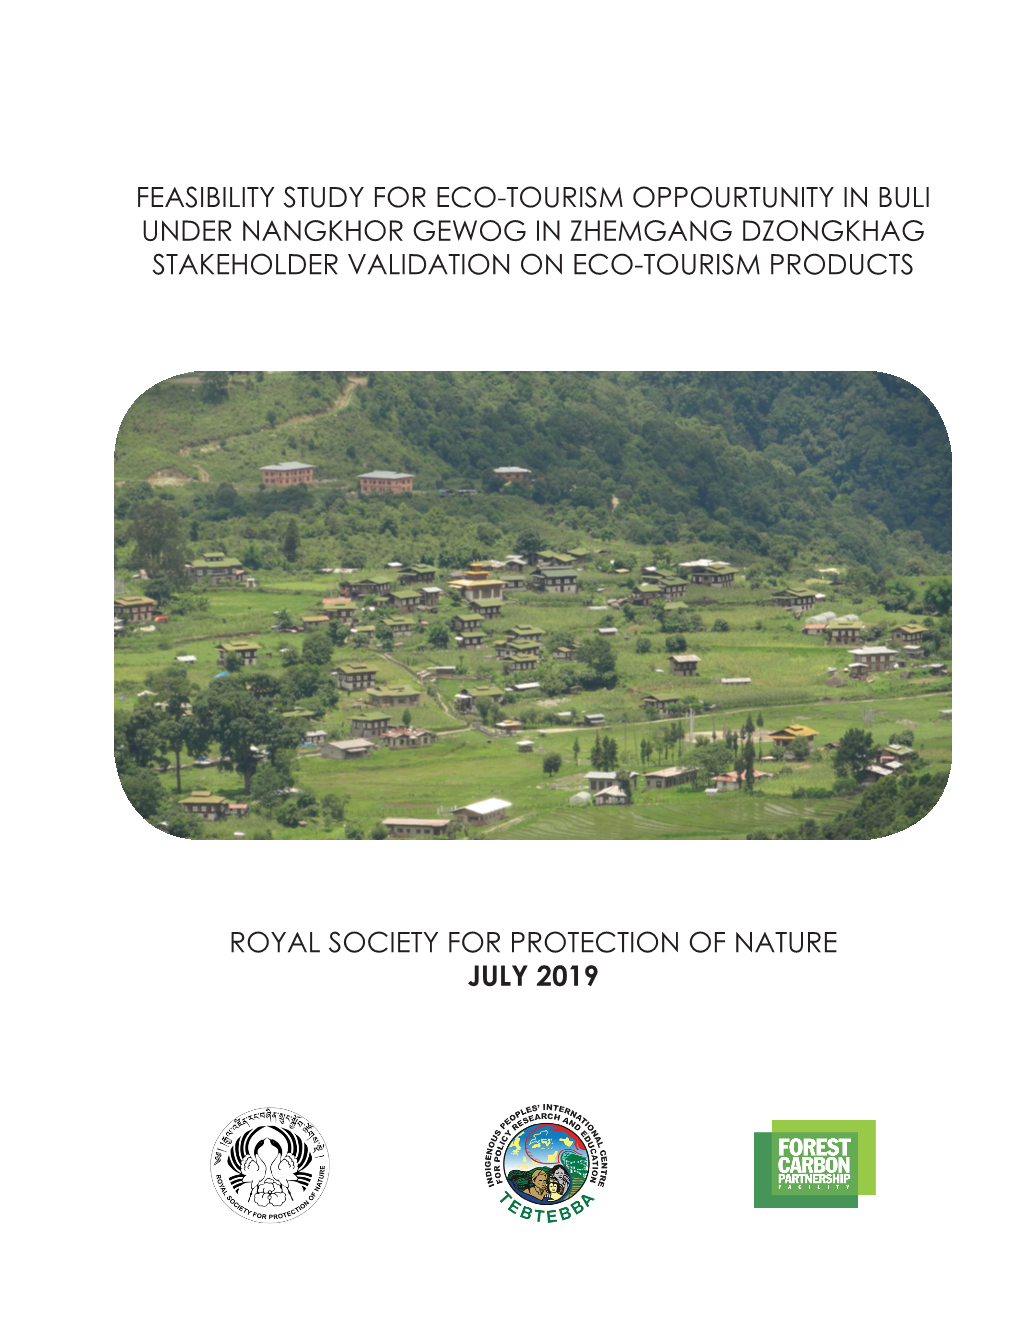 Feasibility Study for Eco-Tourism Oppourtunity in Buli Under Nangkhor Gewog in Zhemgang Dzongkhag Stakeholder Validation on Eco-Tourism Products